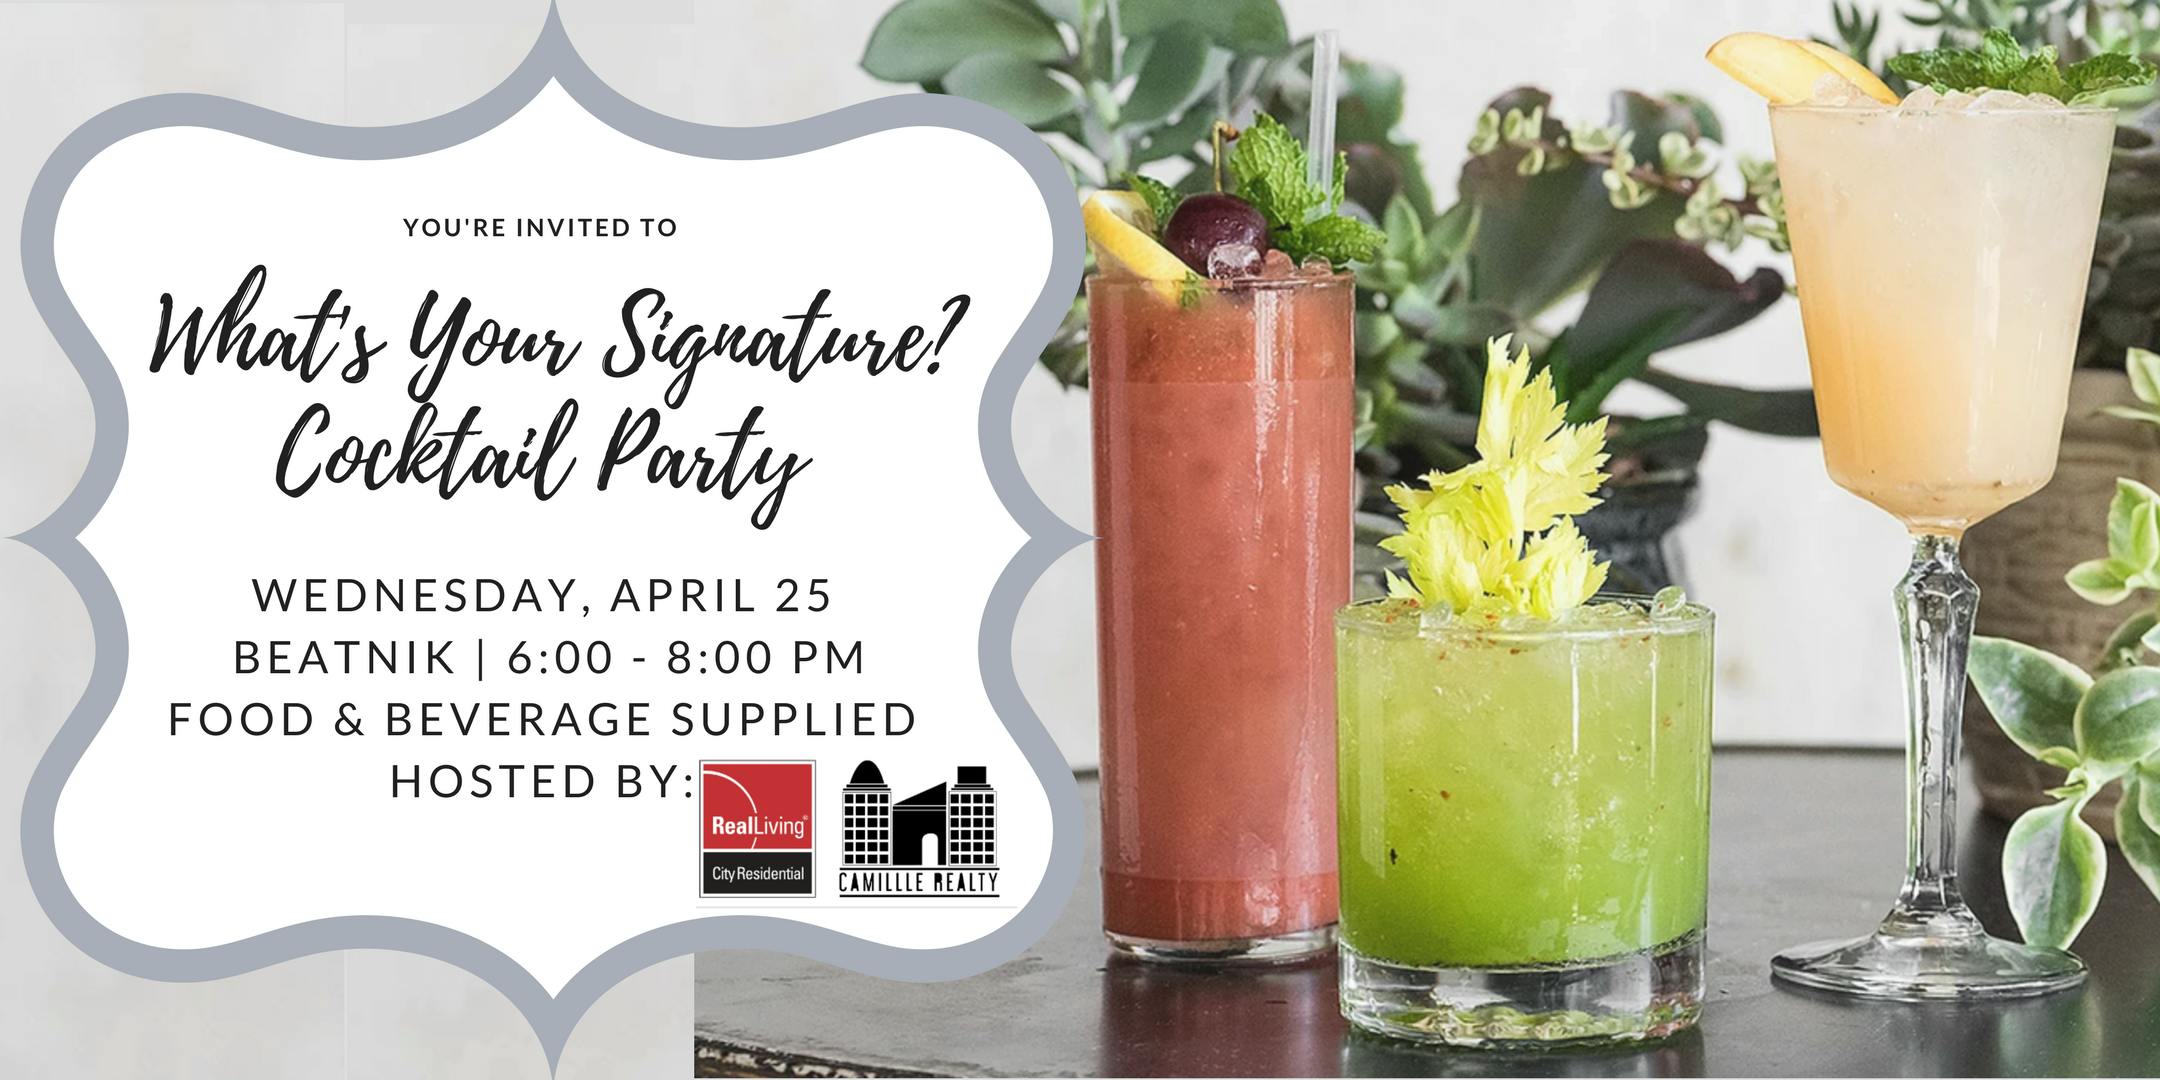 What's Your Signature? - Join us & explore signature cocktails for your wedding reception!